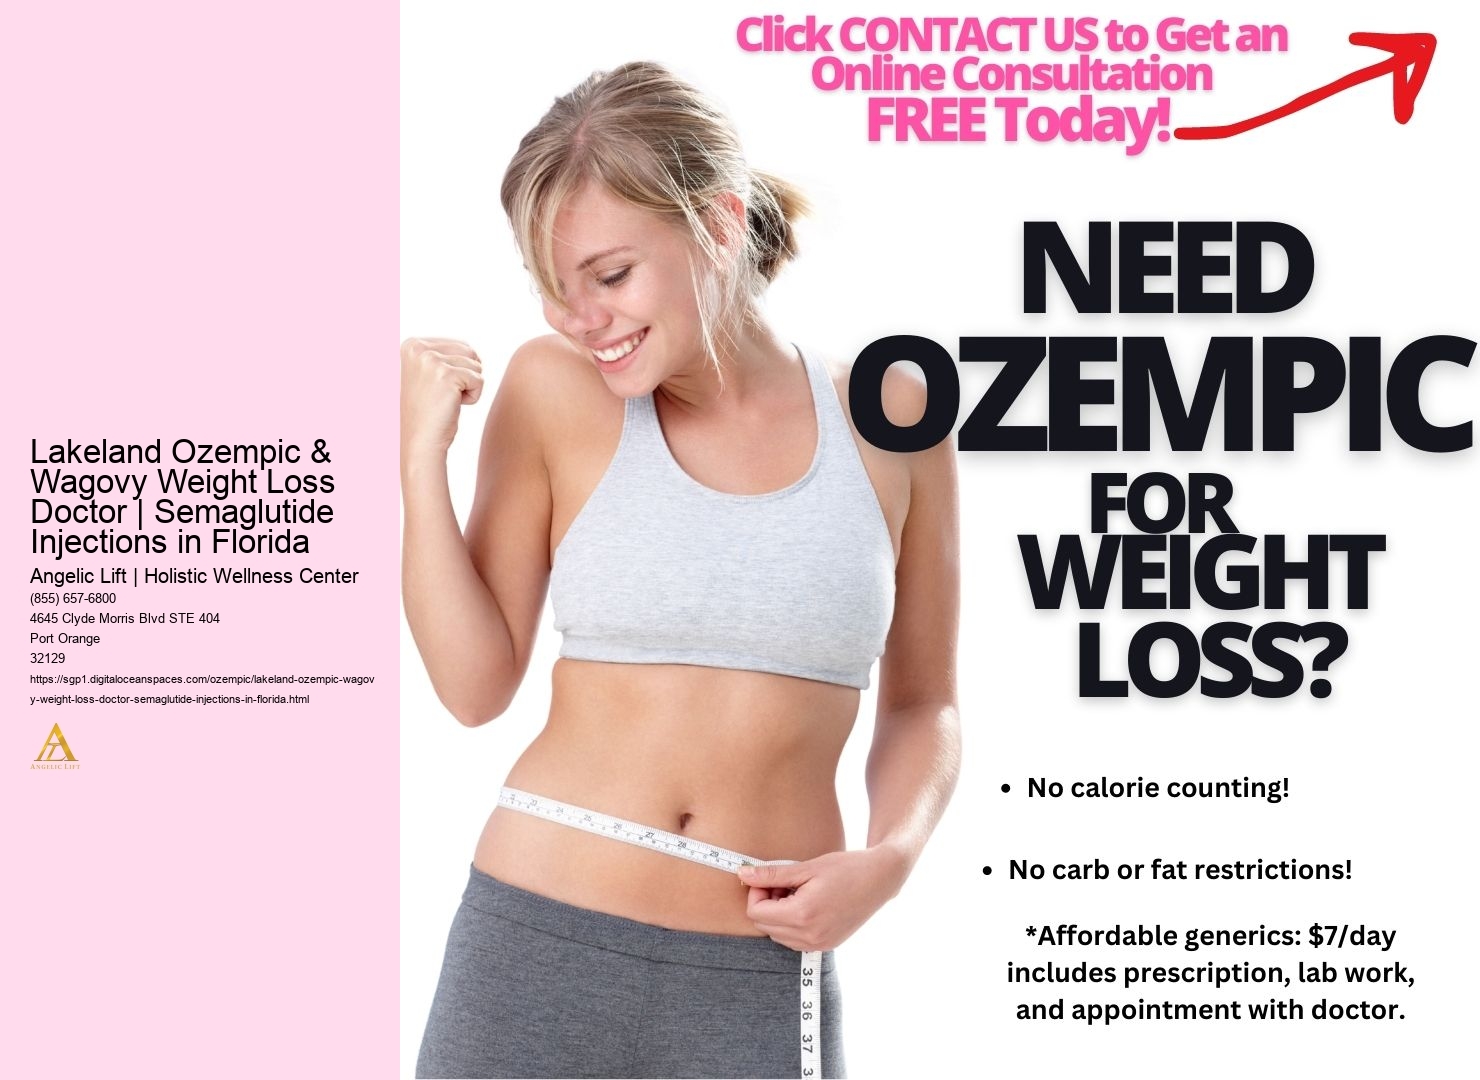 Lakeland Ozempic & Wagovy Weight Loss Doctor | Semaglutide Injections in Florida